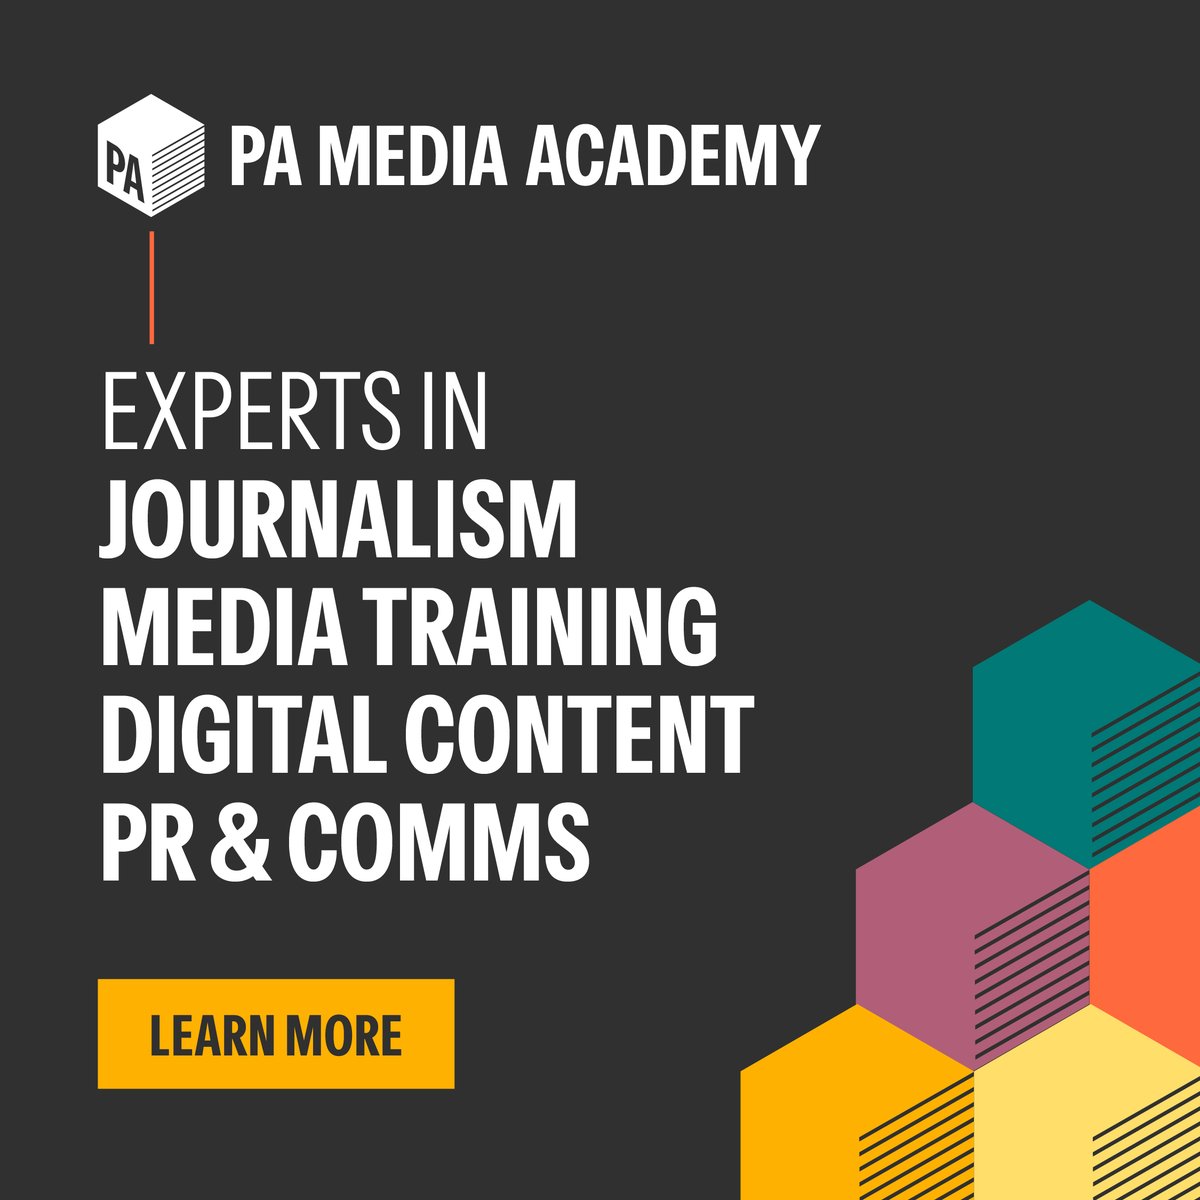 Announcing our new name! PA Media Academy is where to find the best media training, media handling for press, PR & comms teams and communications masterclasses for senior leaders, including public speaking, panel speaking, presenting at board level and much more #mediatraining